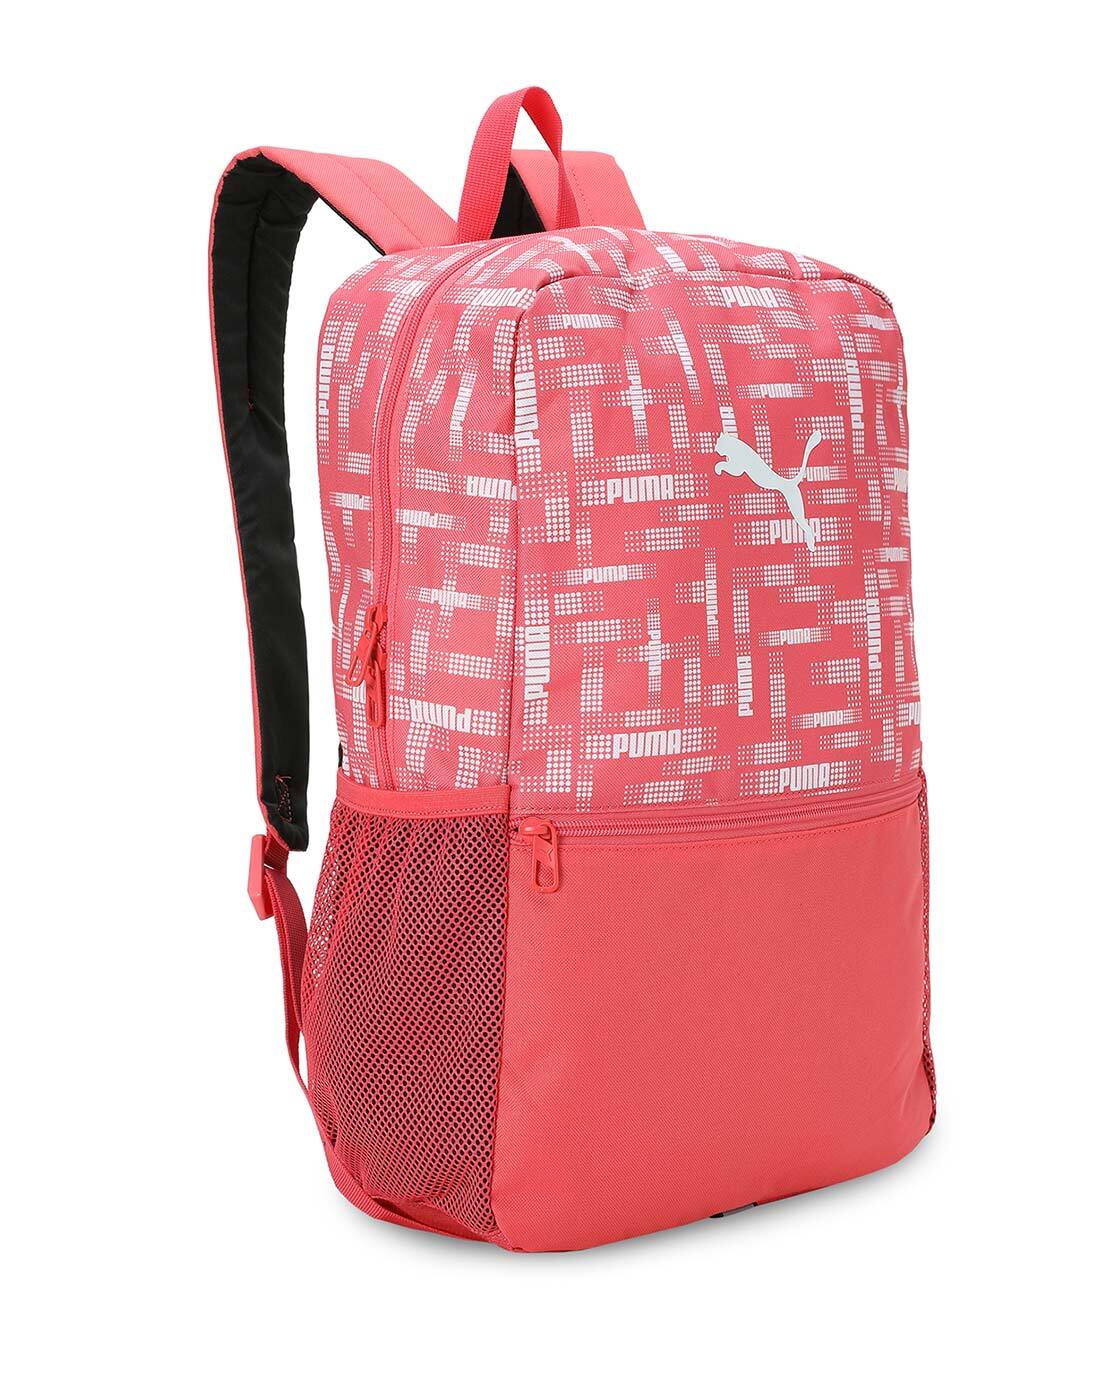 Core up backpack with logo print, pink, Puma | La Redoute